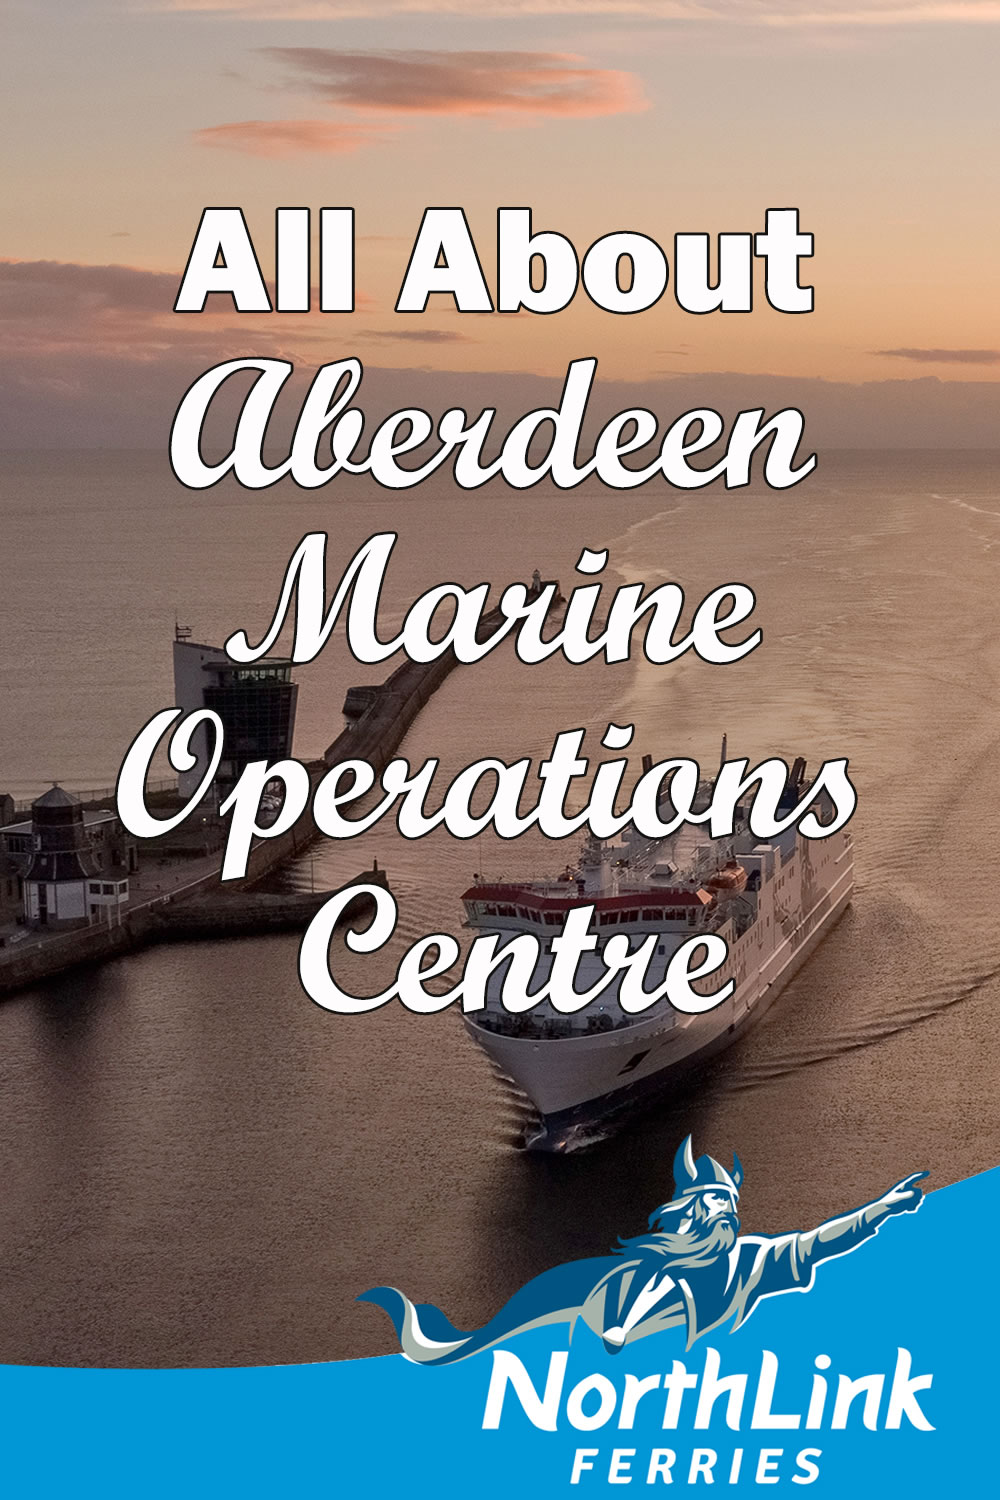 All about Aberdeen Marine Operations Centre